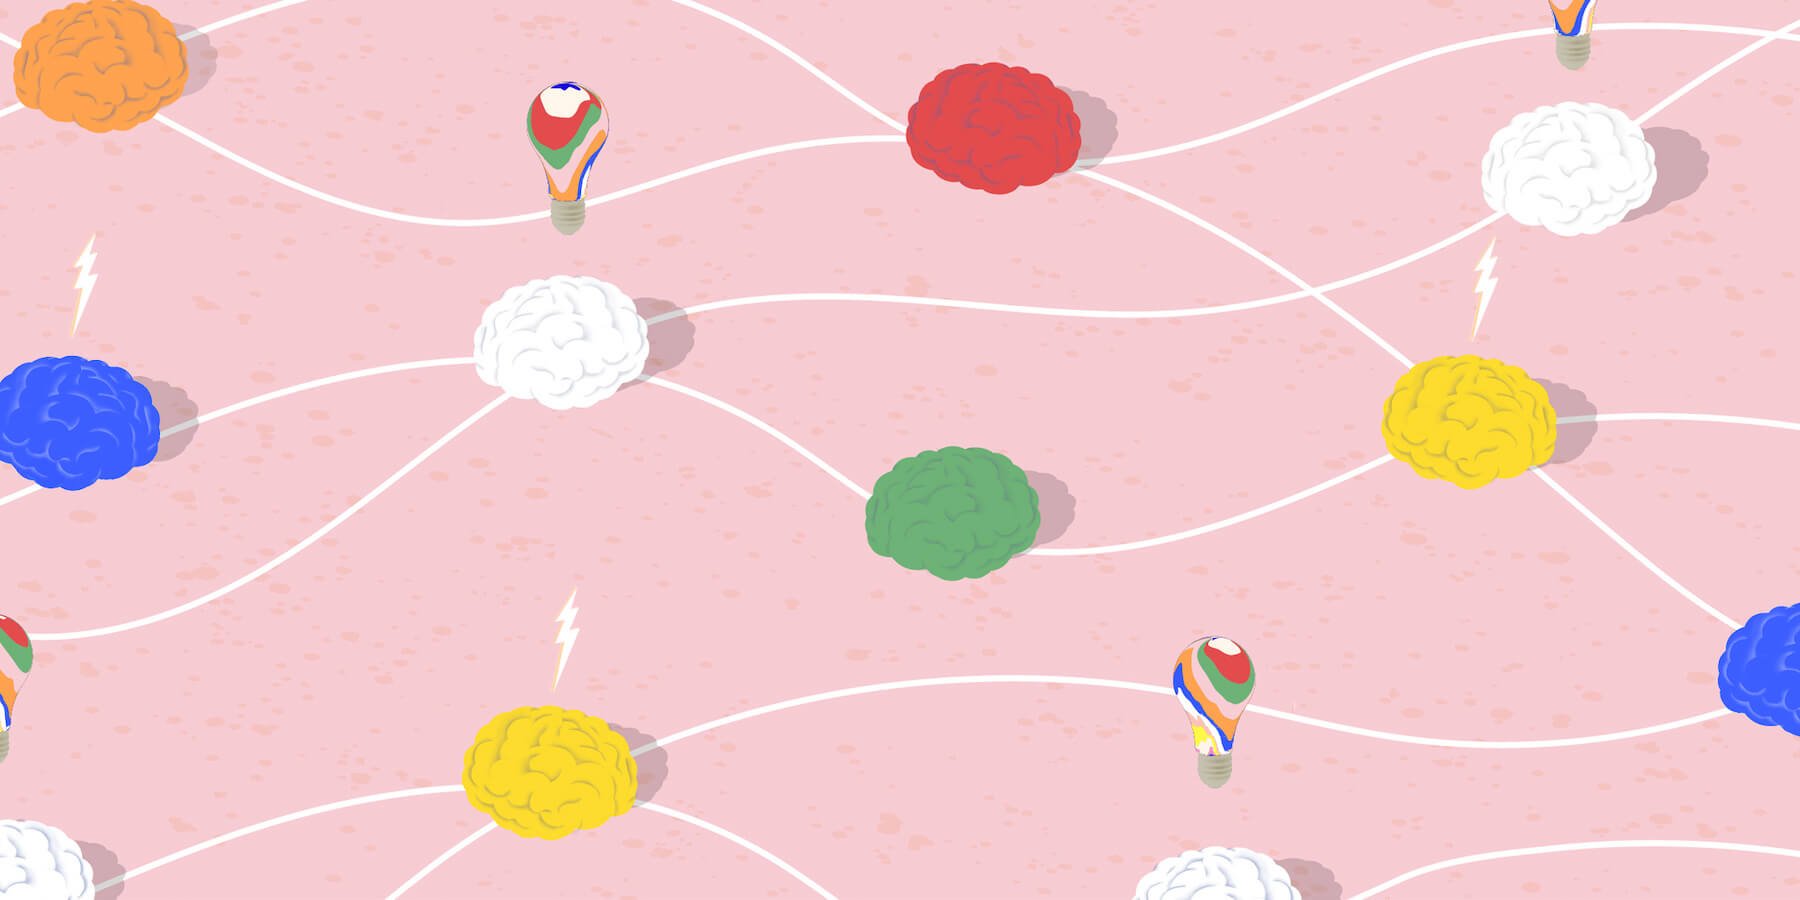 colorful brains, lightbulbs, and lightning bolts floating in a pink scene